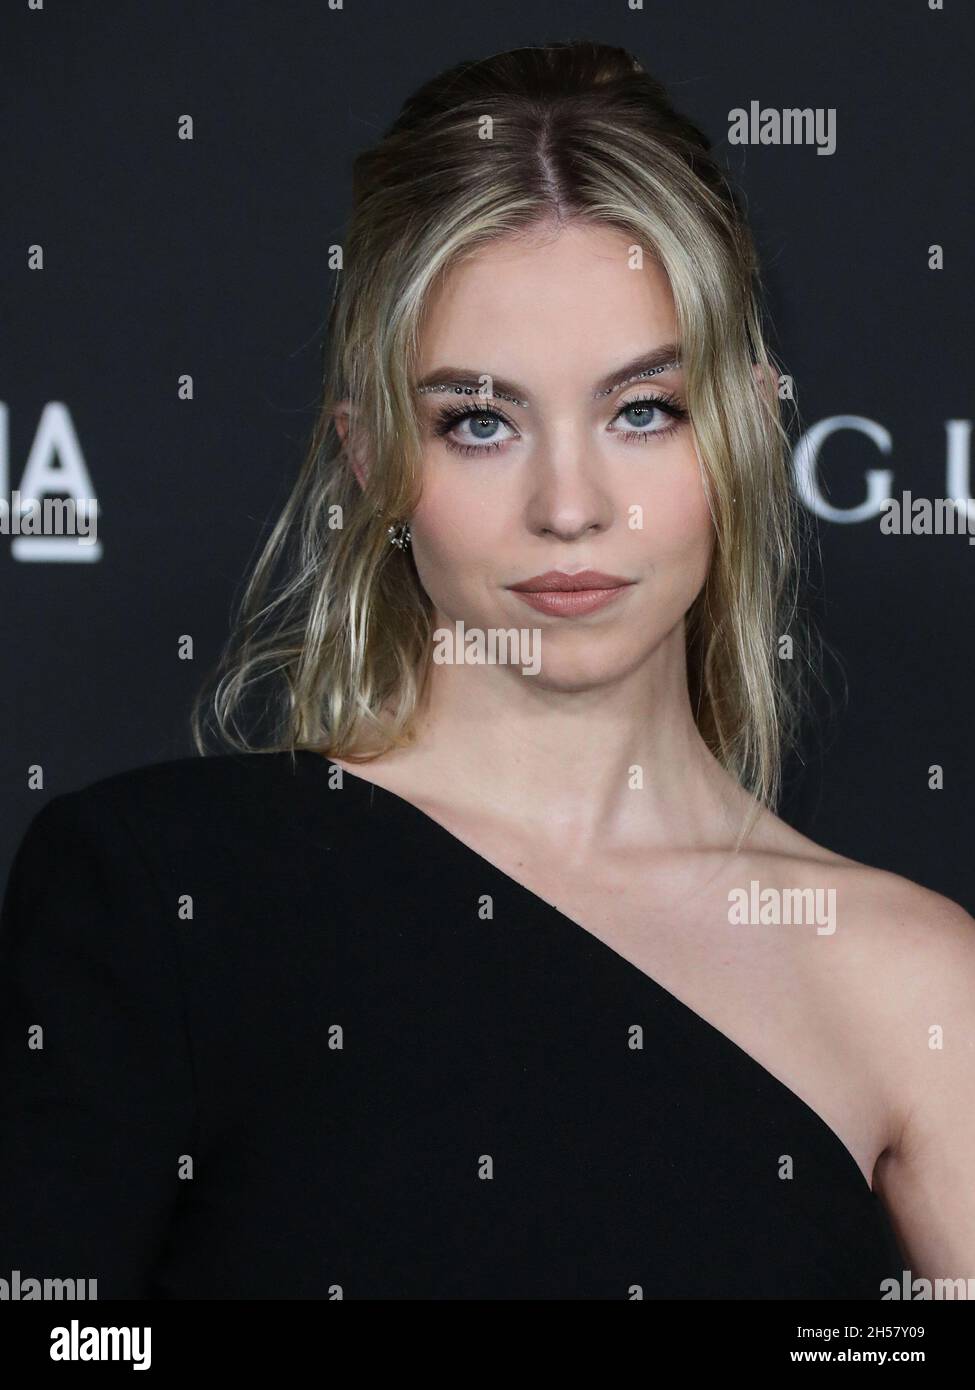 LOS ANGELES, CALIFORNIA, USA - NOVEMBER 06: Sydney Sweeney wearing a Saint Laurent dress arrives at the 10th Annual LACMA Art + Film Gala 2021 held at the Los Angeles County Museum of Art on November 6, 2021 in Los Angeles, California, United States. (Photo by Xavier Collin/Image Press Agency/Sipa USA) Stock Photo